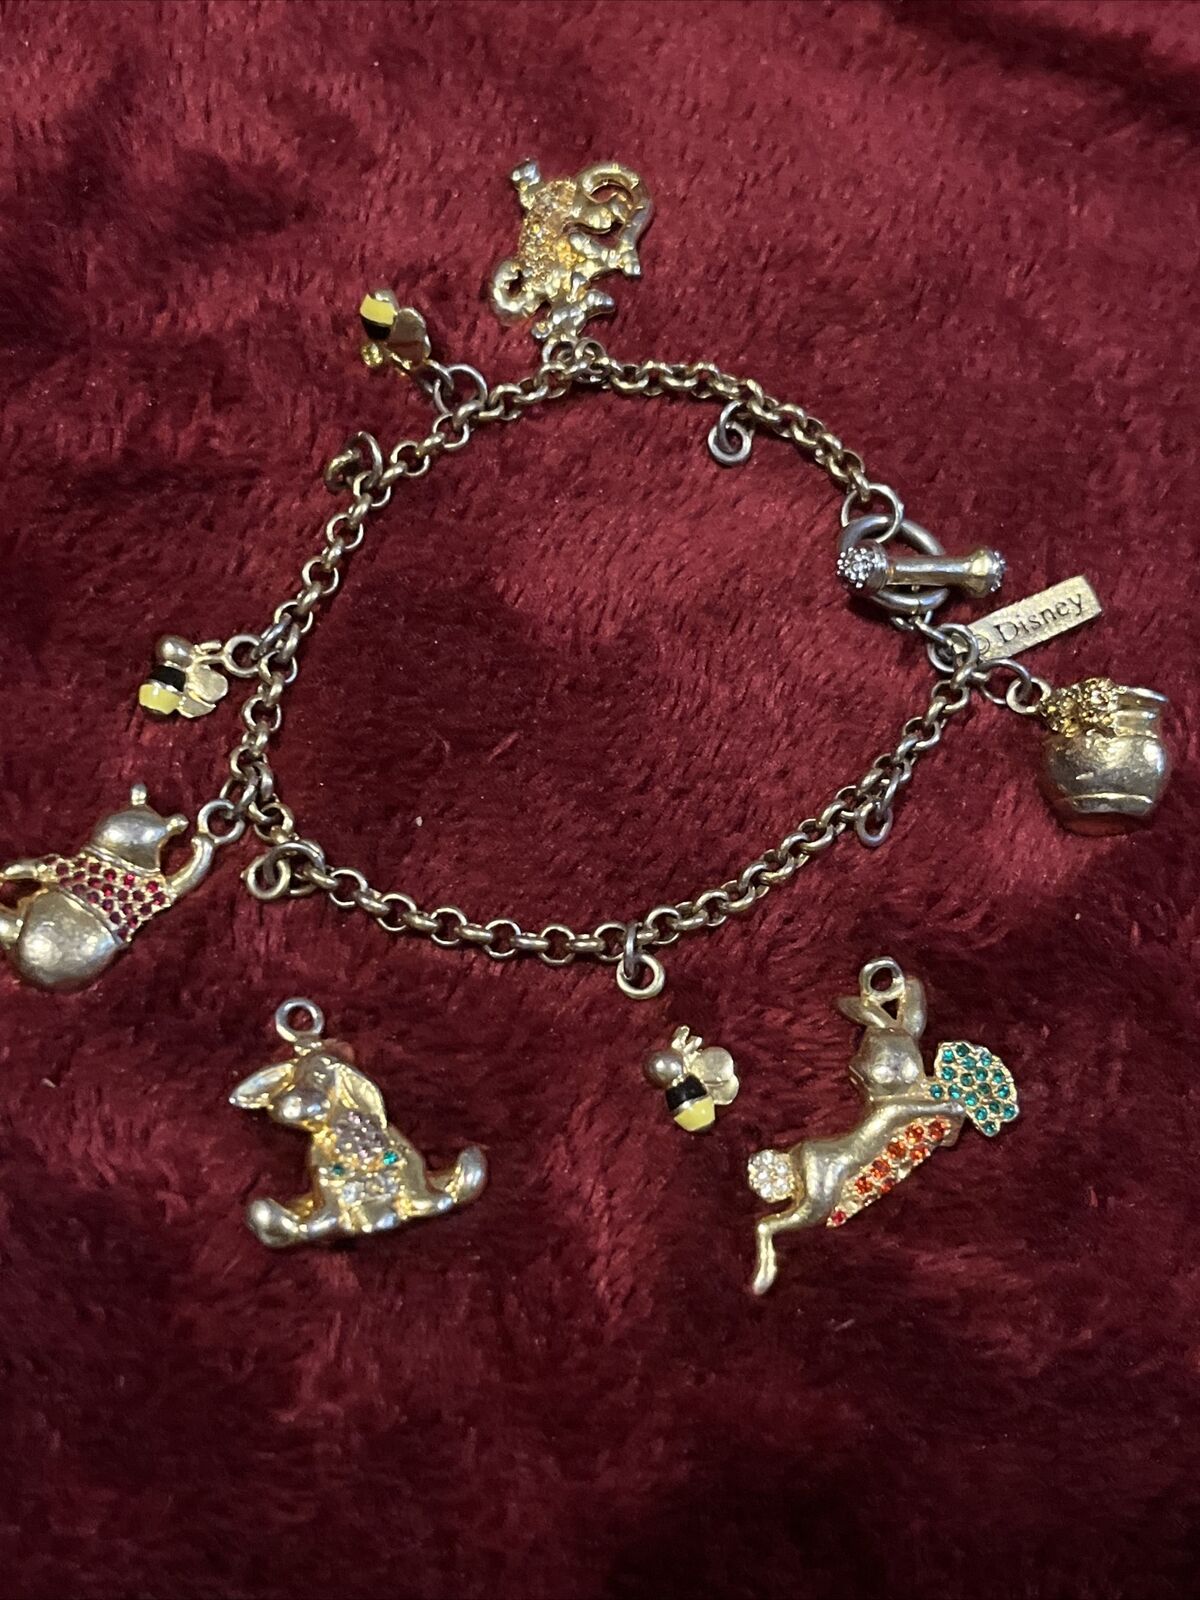 Vintage Winnie the Pooh And Friends Charm Bracelet A Couple Of Charms Came Off